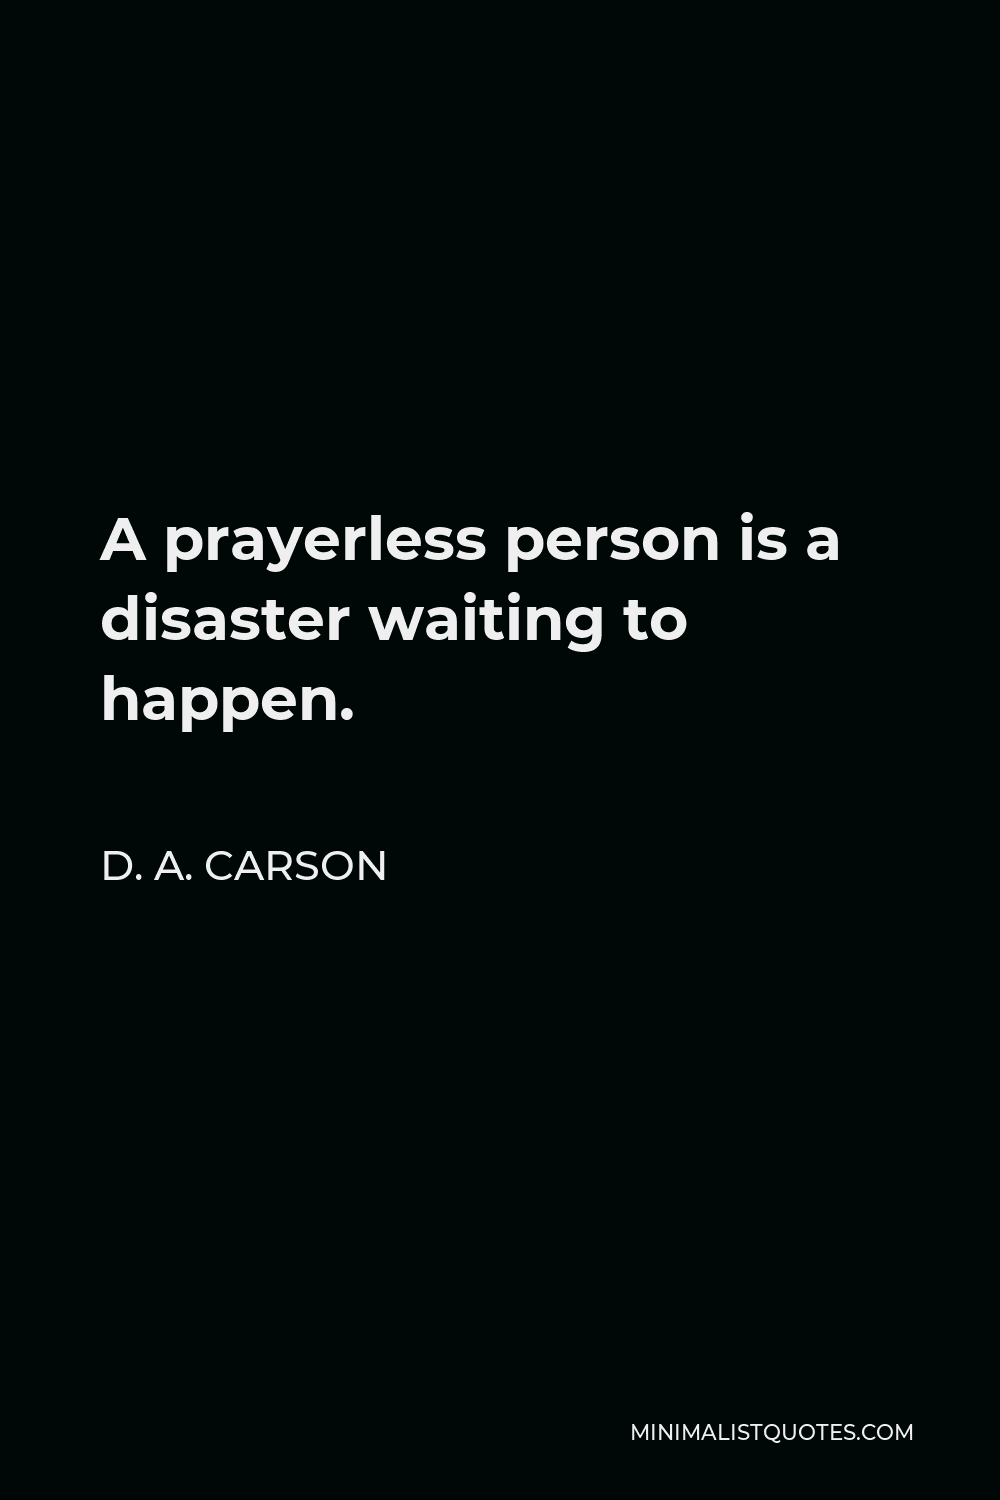 D. A. Carson Quote - A prayerless person is a disaster waiting to happen.